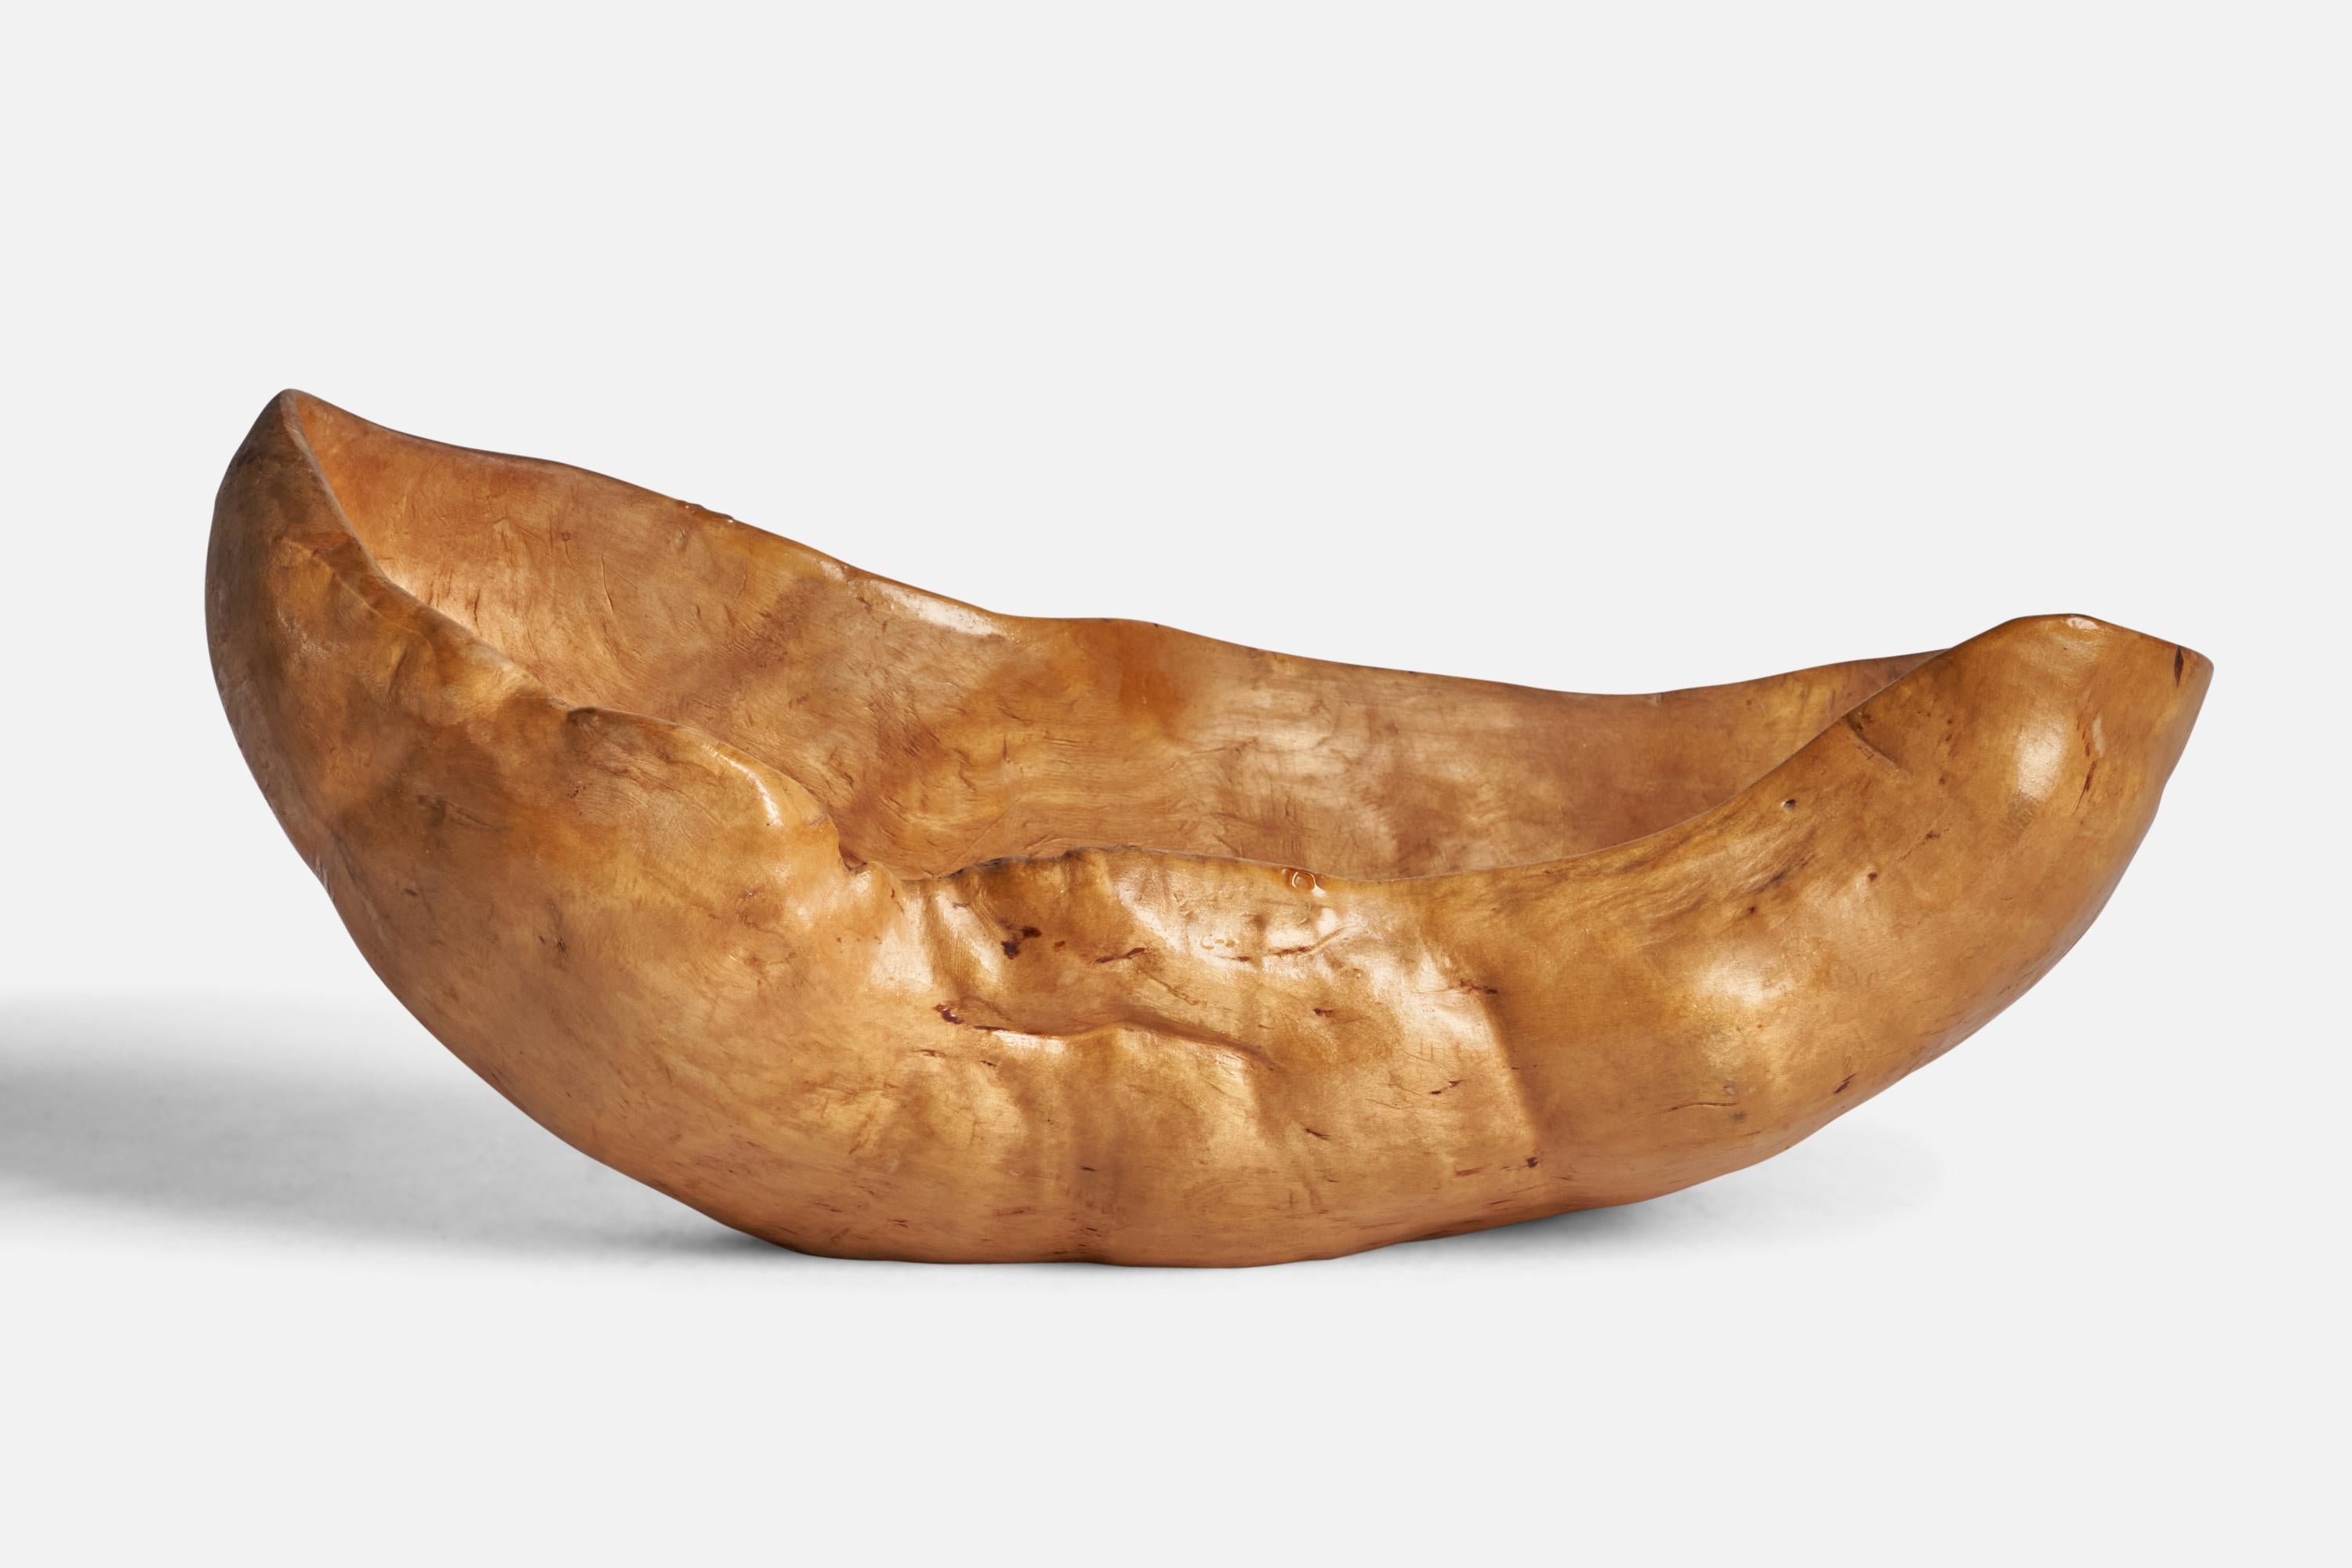 A burl wood bowl designed and produced in Sweden, c. 1960s.